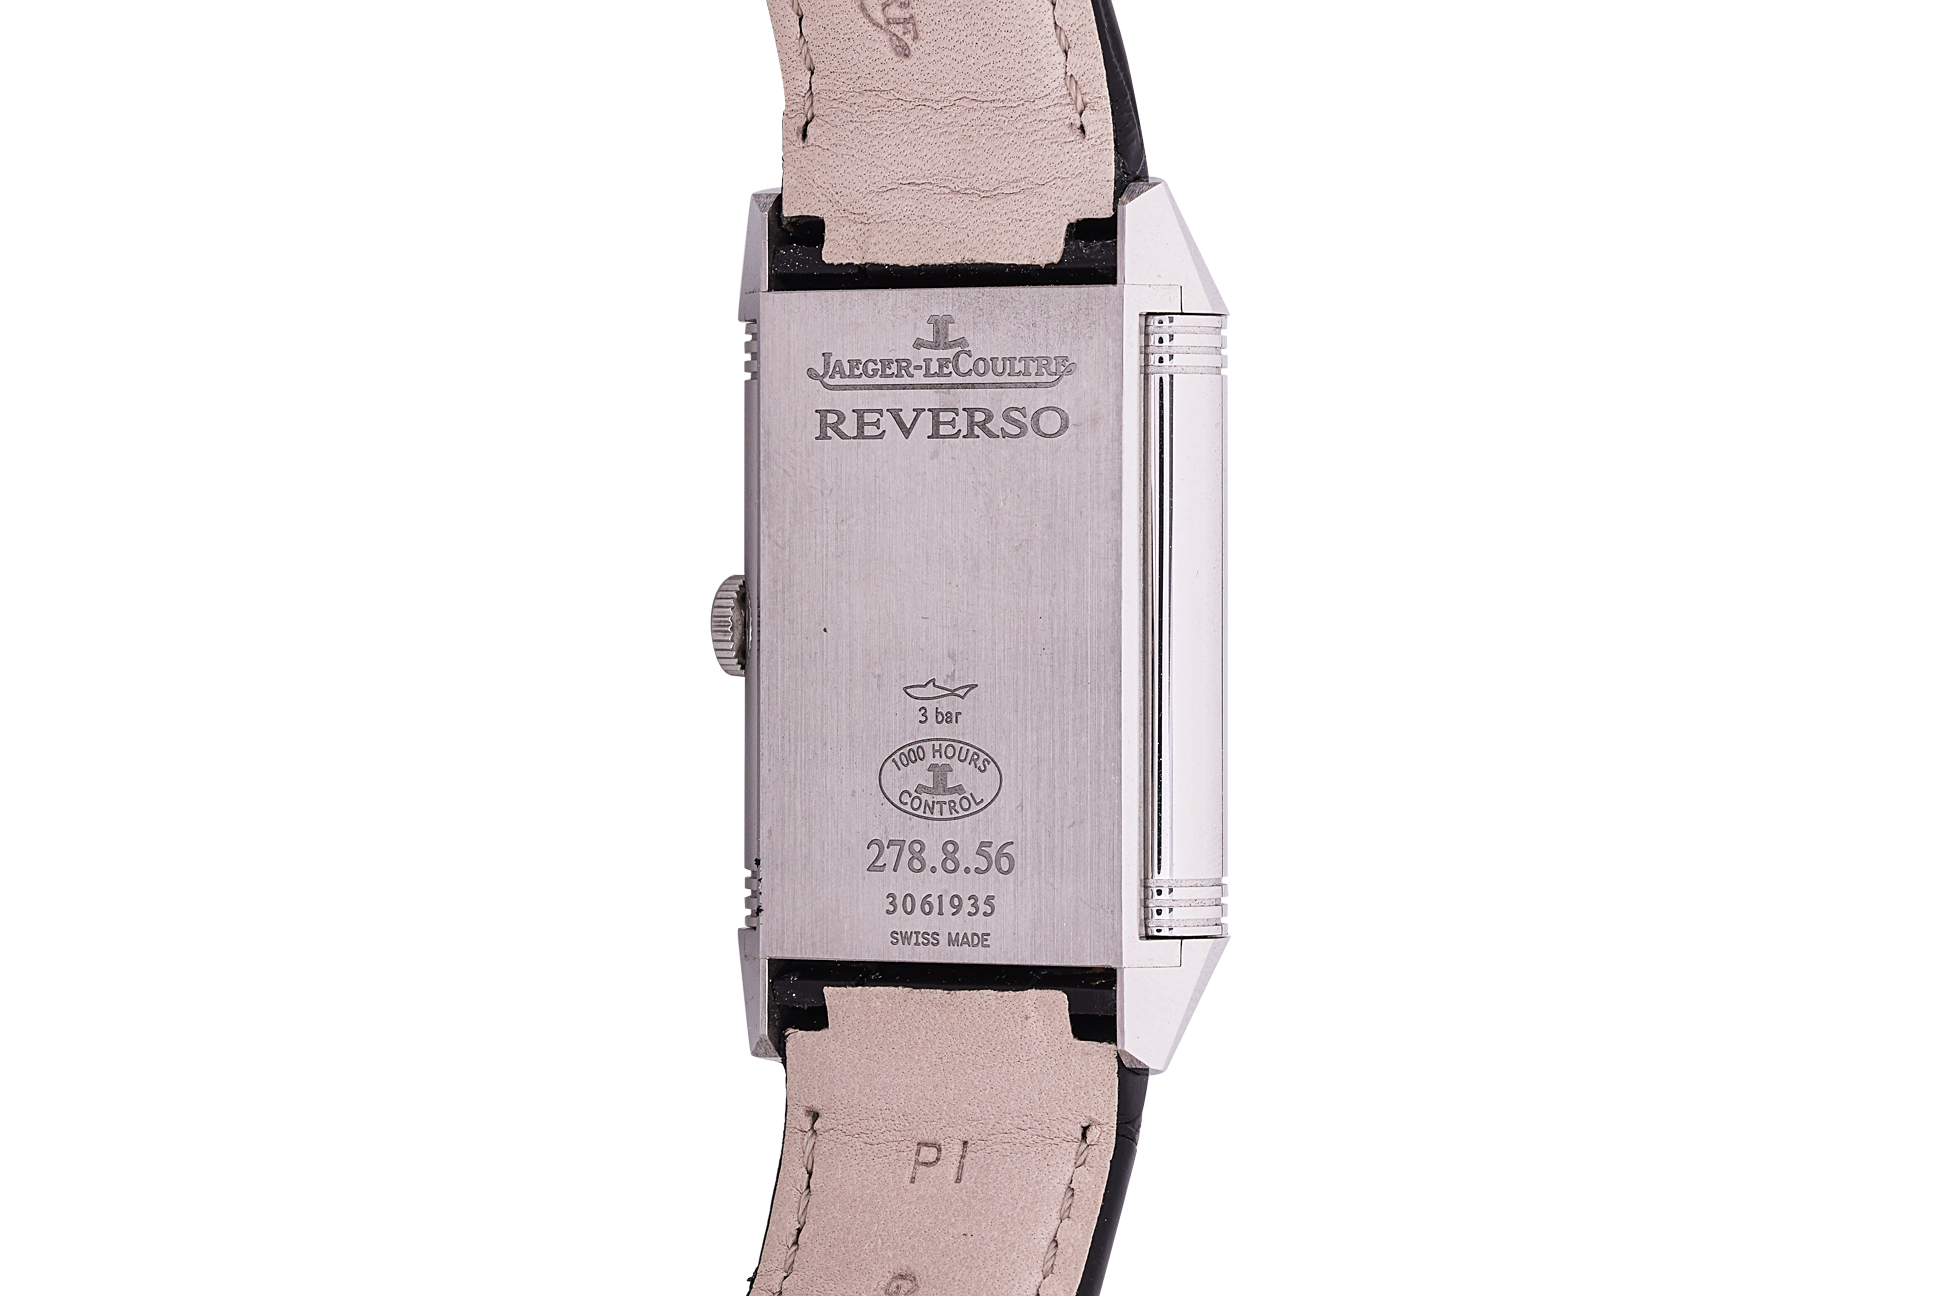 A JAEGER LECOULTRE LIMITED EDITION SG 50 REVERSO WATCH - Image 5 of 8